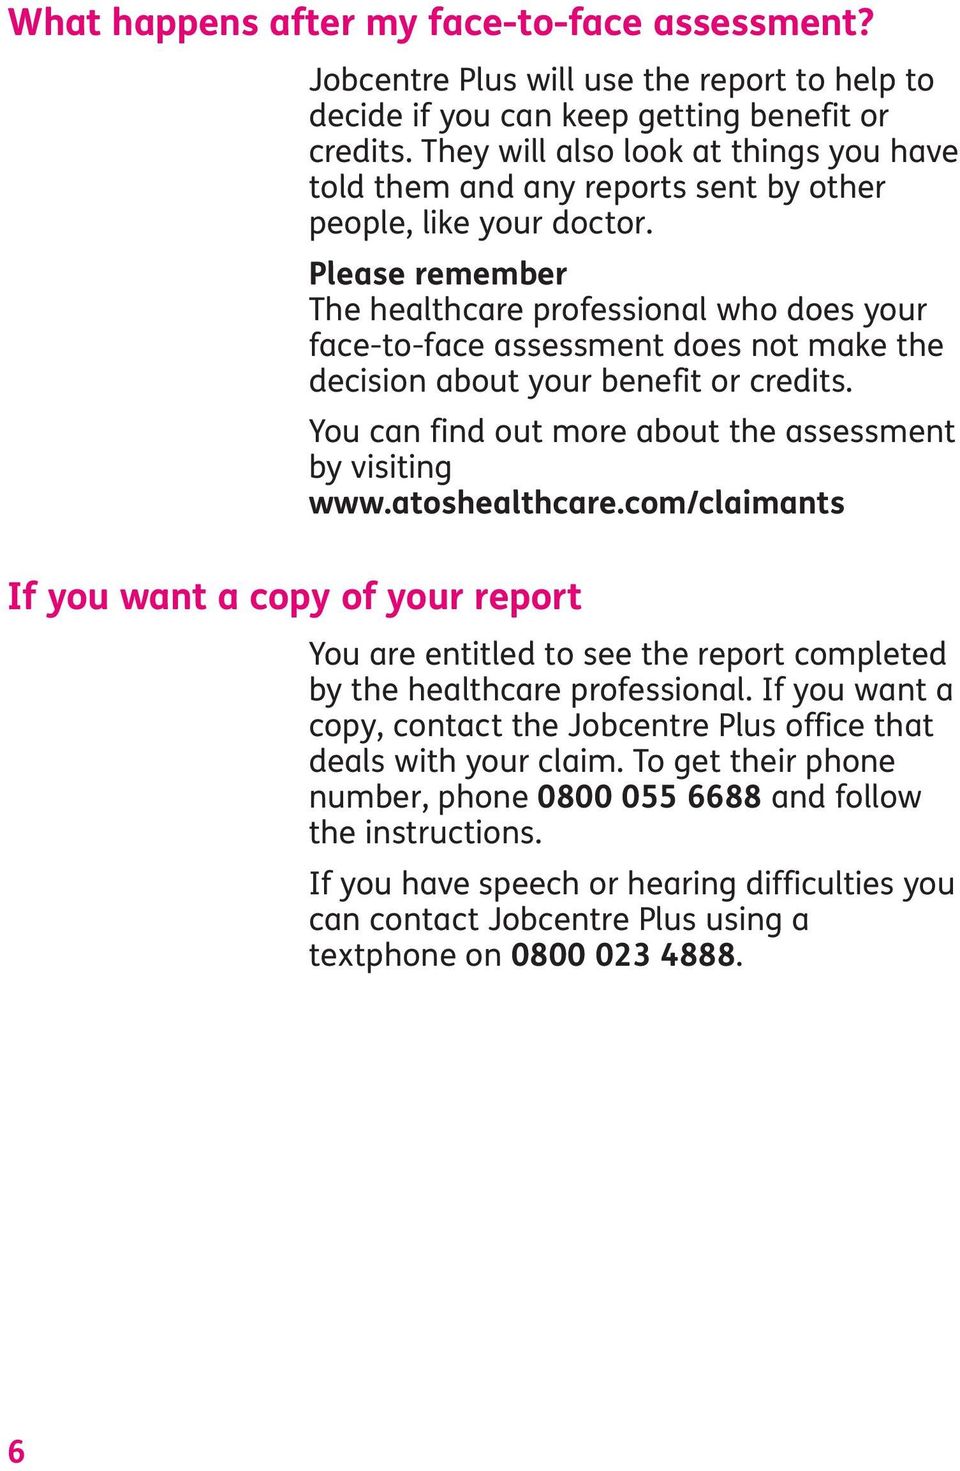 Please remember The healthcare professional who does your face-to-face assessment does not make the decision about your benefit or credits. You can find out more about the assessment by visiting www.